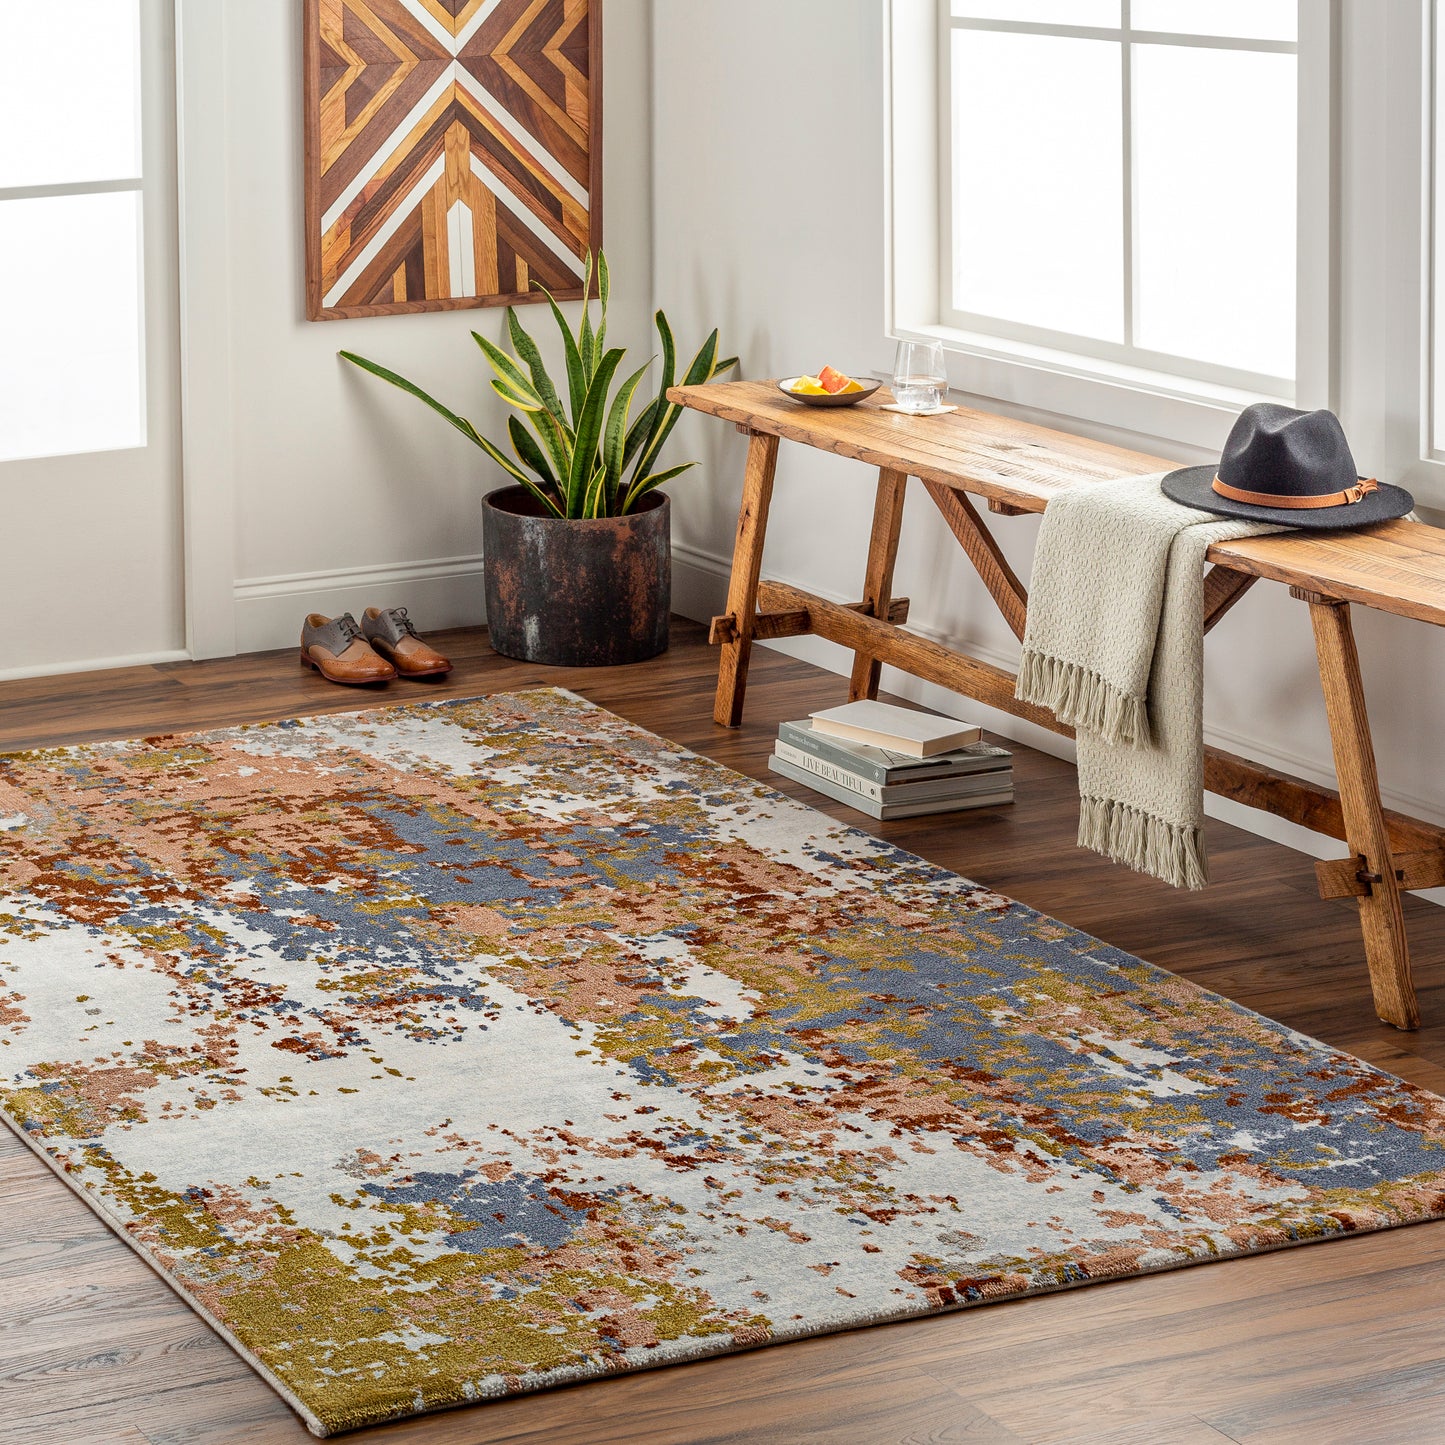 Delight 30313 Machine Woven Synthetic Blend Indoor Area Rug by Surya Rugs